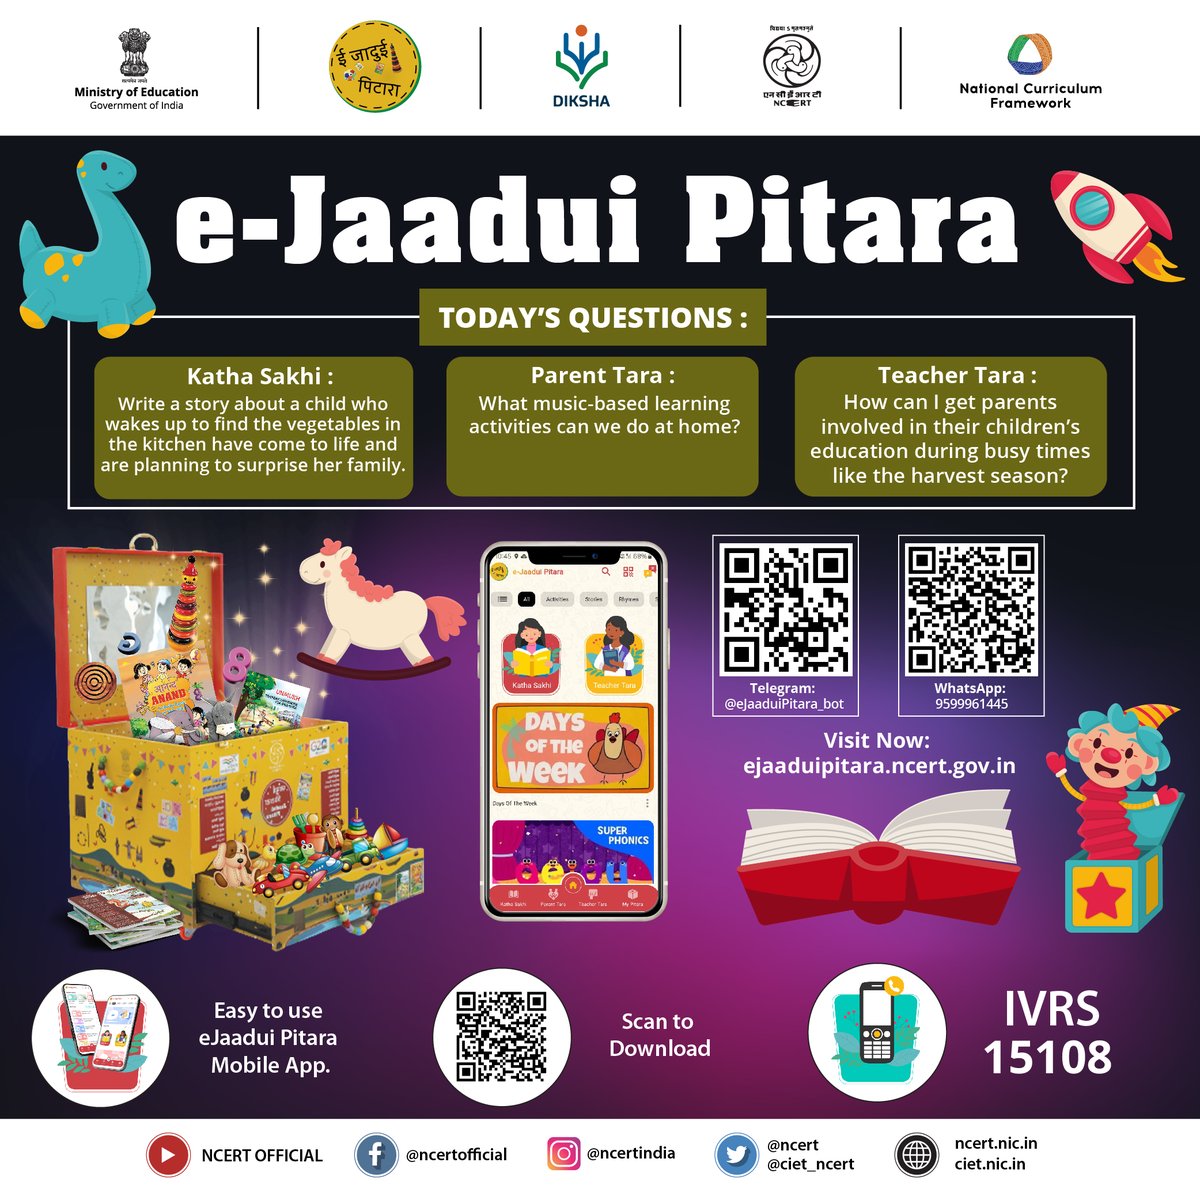 Dear Friends , Do you know that NCERT, under the aegis of the Ministry of Education, Government of India has launched an app for teachers and parents of children in the foundational stage (age group 3-8 years)? This App has three AI Bots - Katha Sakhi, Parent Tara and Teacher